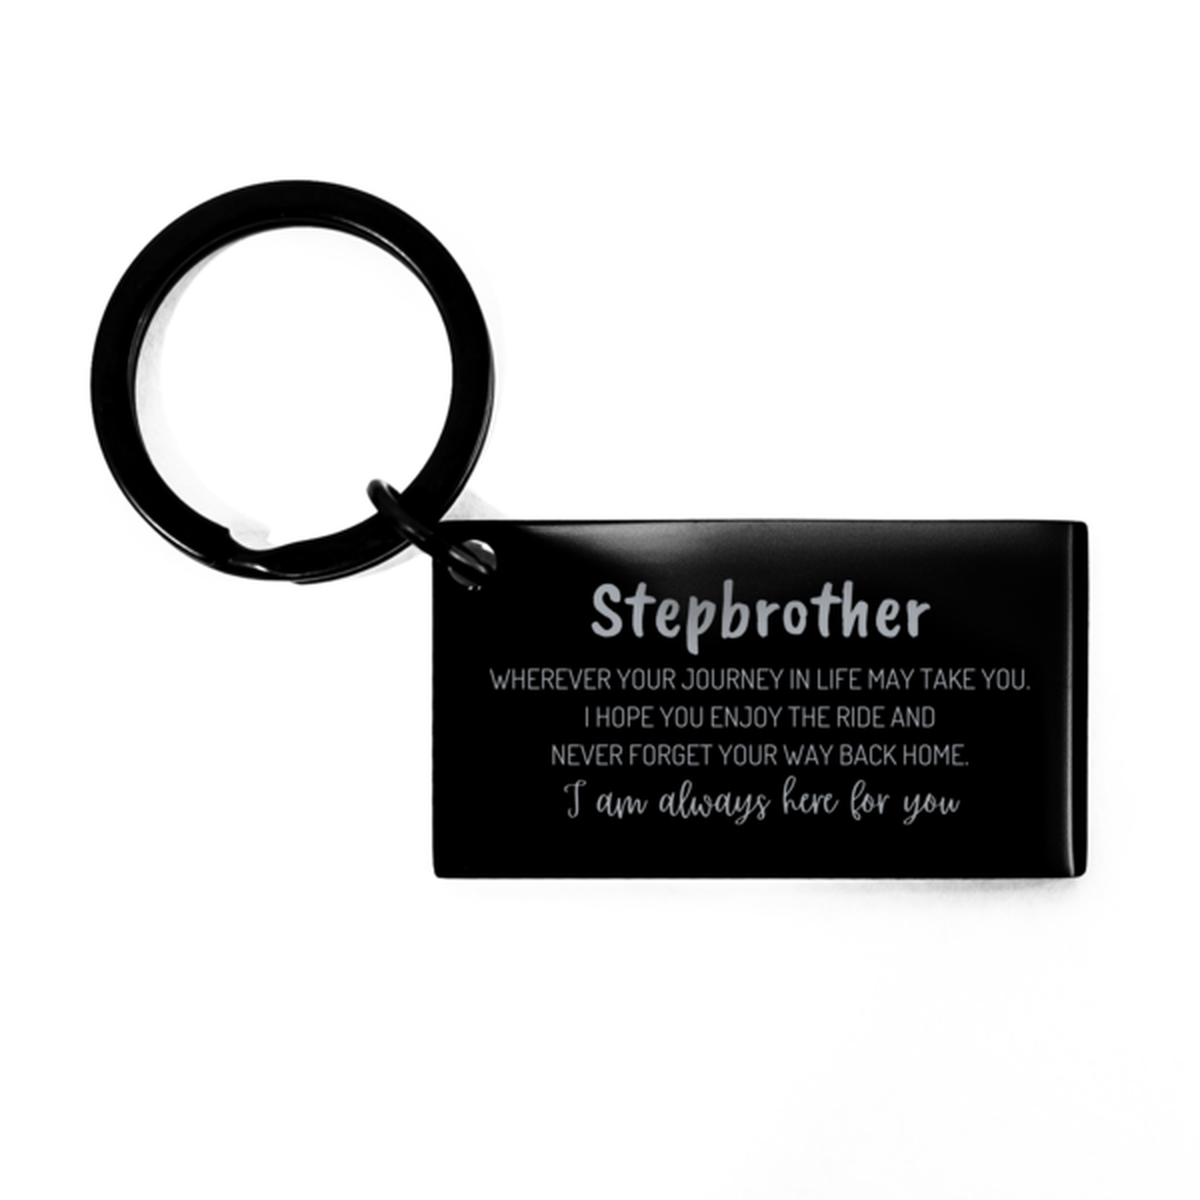 Stepbrother wherever your journey in life may take you, I am always here for you Stepbrother Keychain, Awesome Christmas Gifts For Stepbrother, Stepbrother Birthday Gifts for Men Women Family Loved One